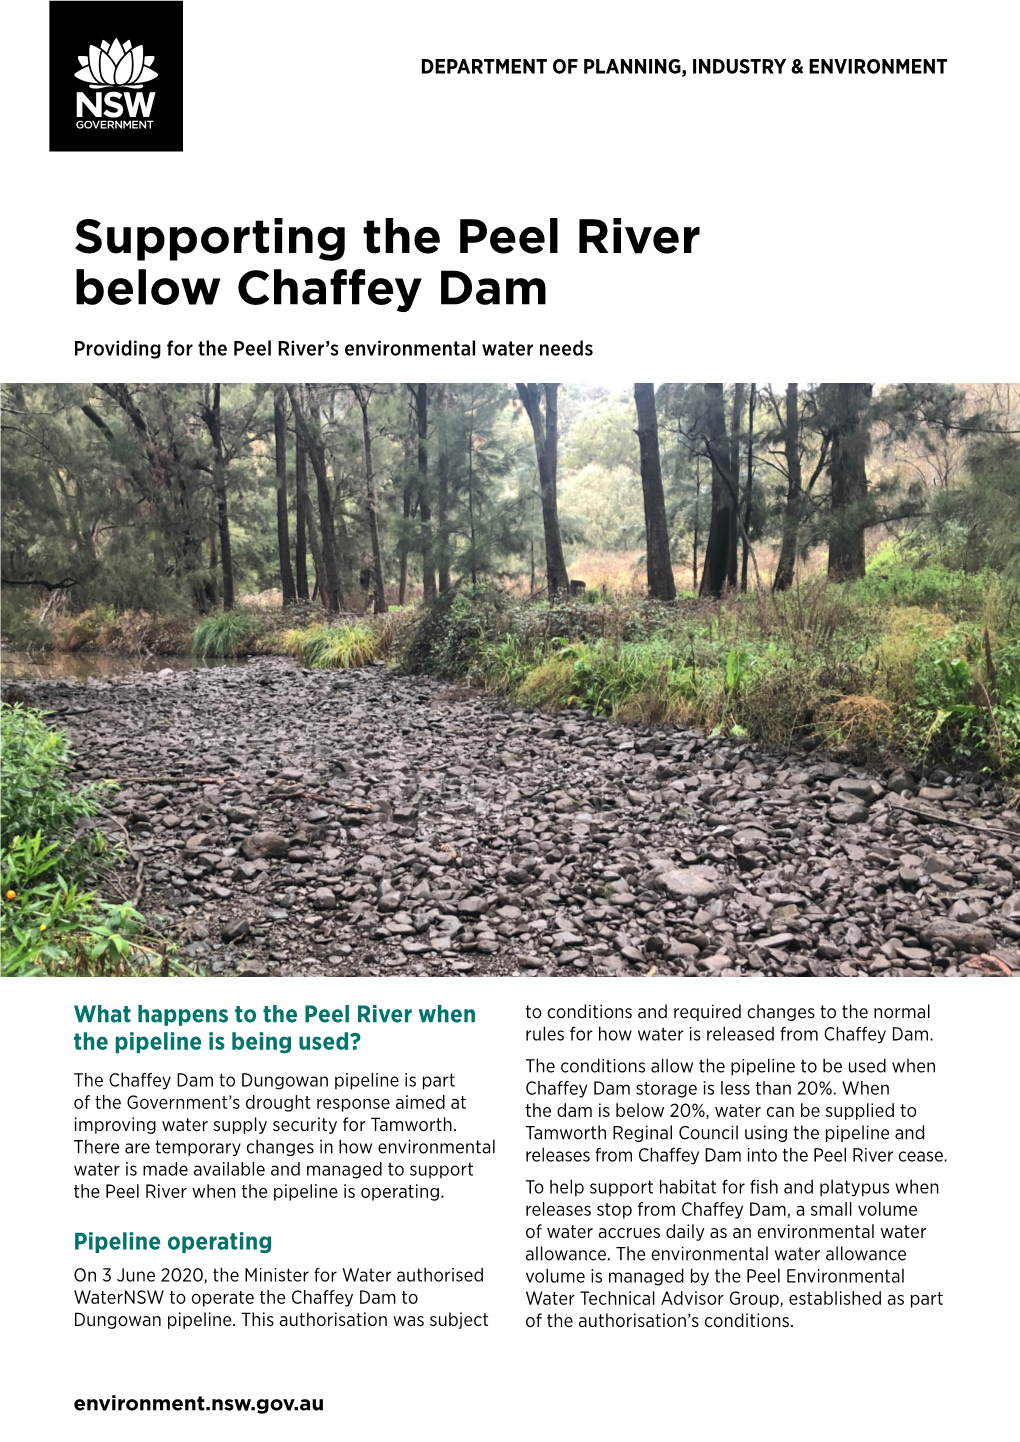 Supporting the Peel River Below Chaffey Dam